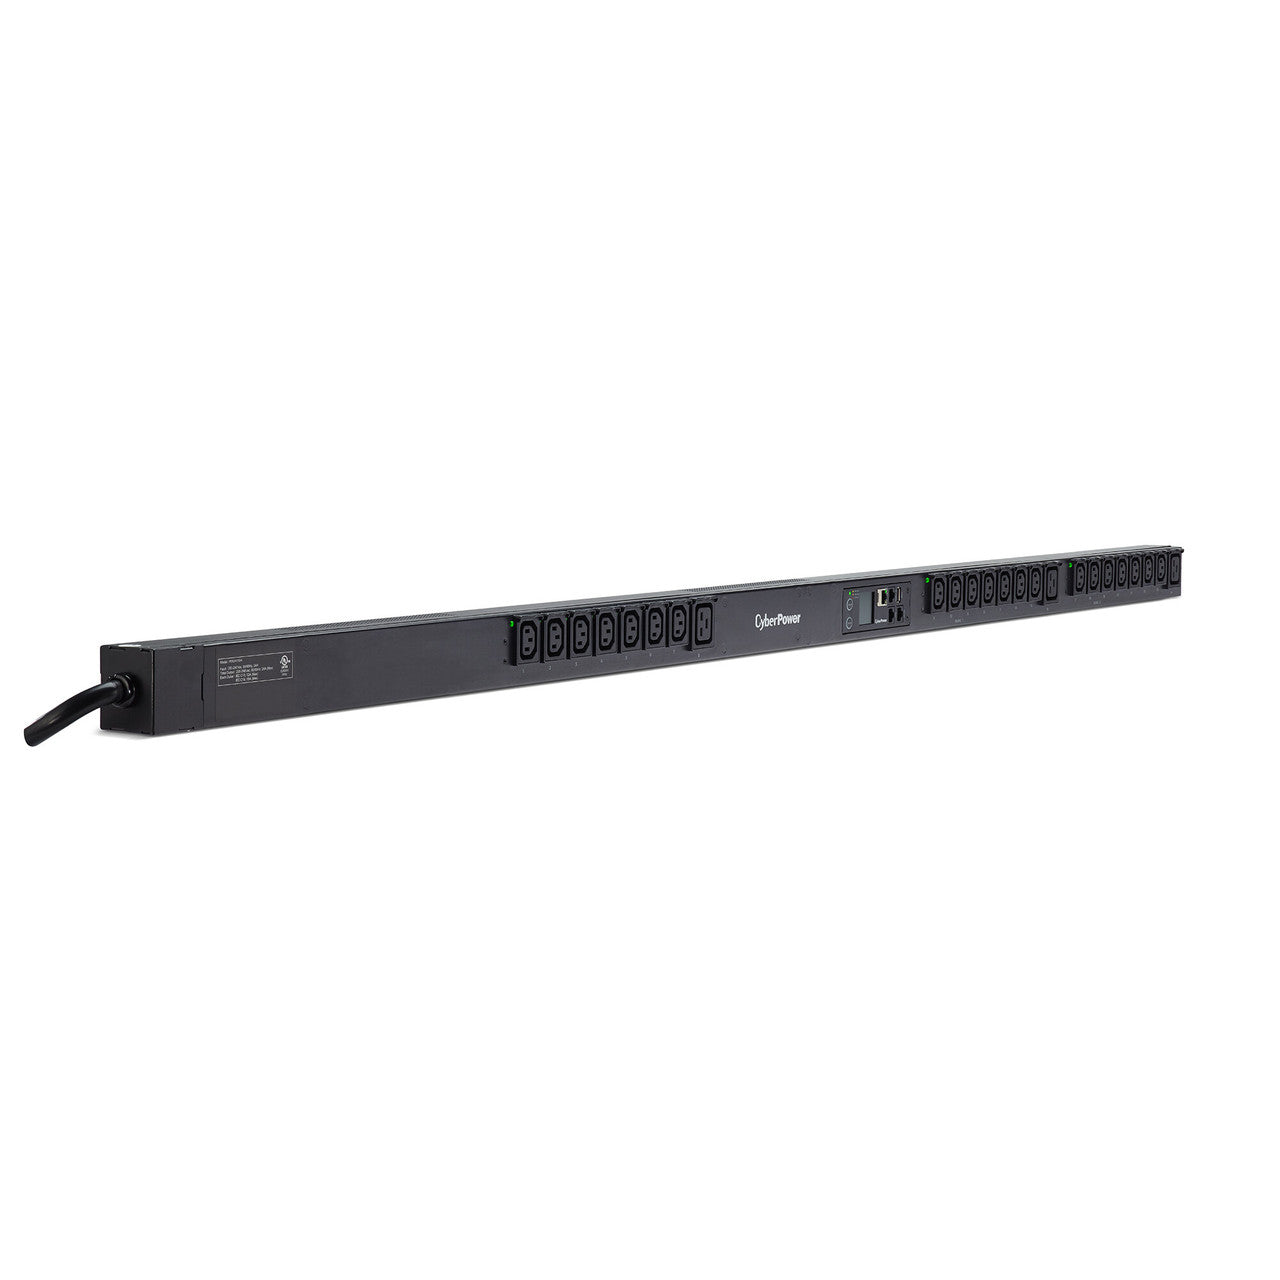 CyberPower PDU41104 SWITCHED PDU, 20A (DERATED TO 16A), 200-240V, 50/60 HZ, 21 x IEC-320 C13 OUTLETS + 3 x IEC-320 C19 OUTLETS